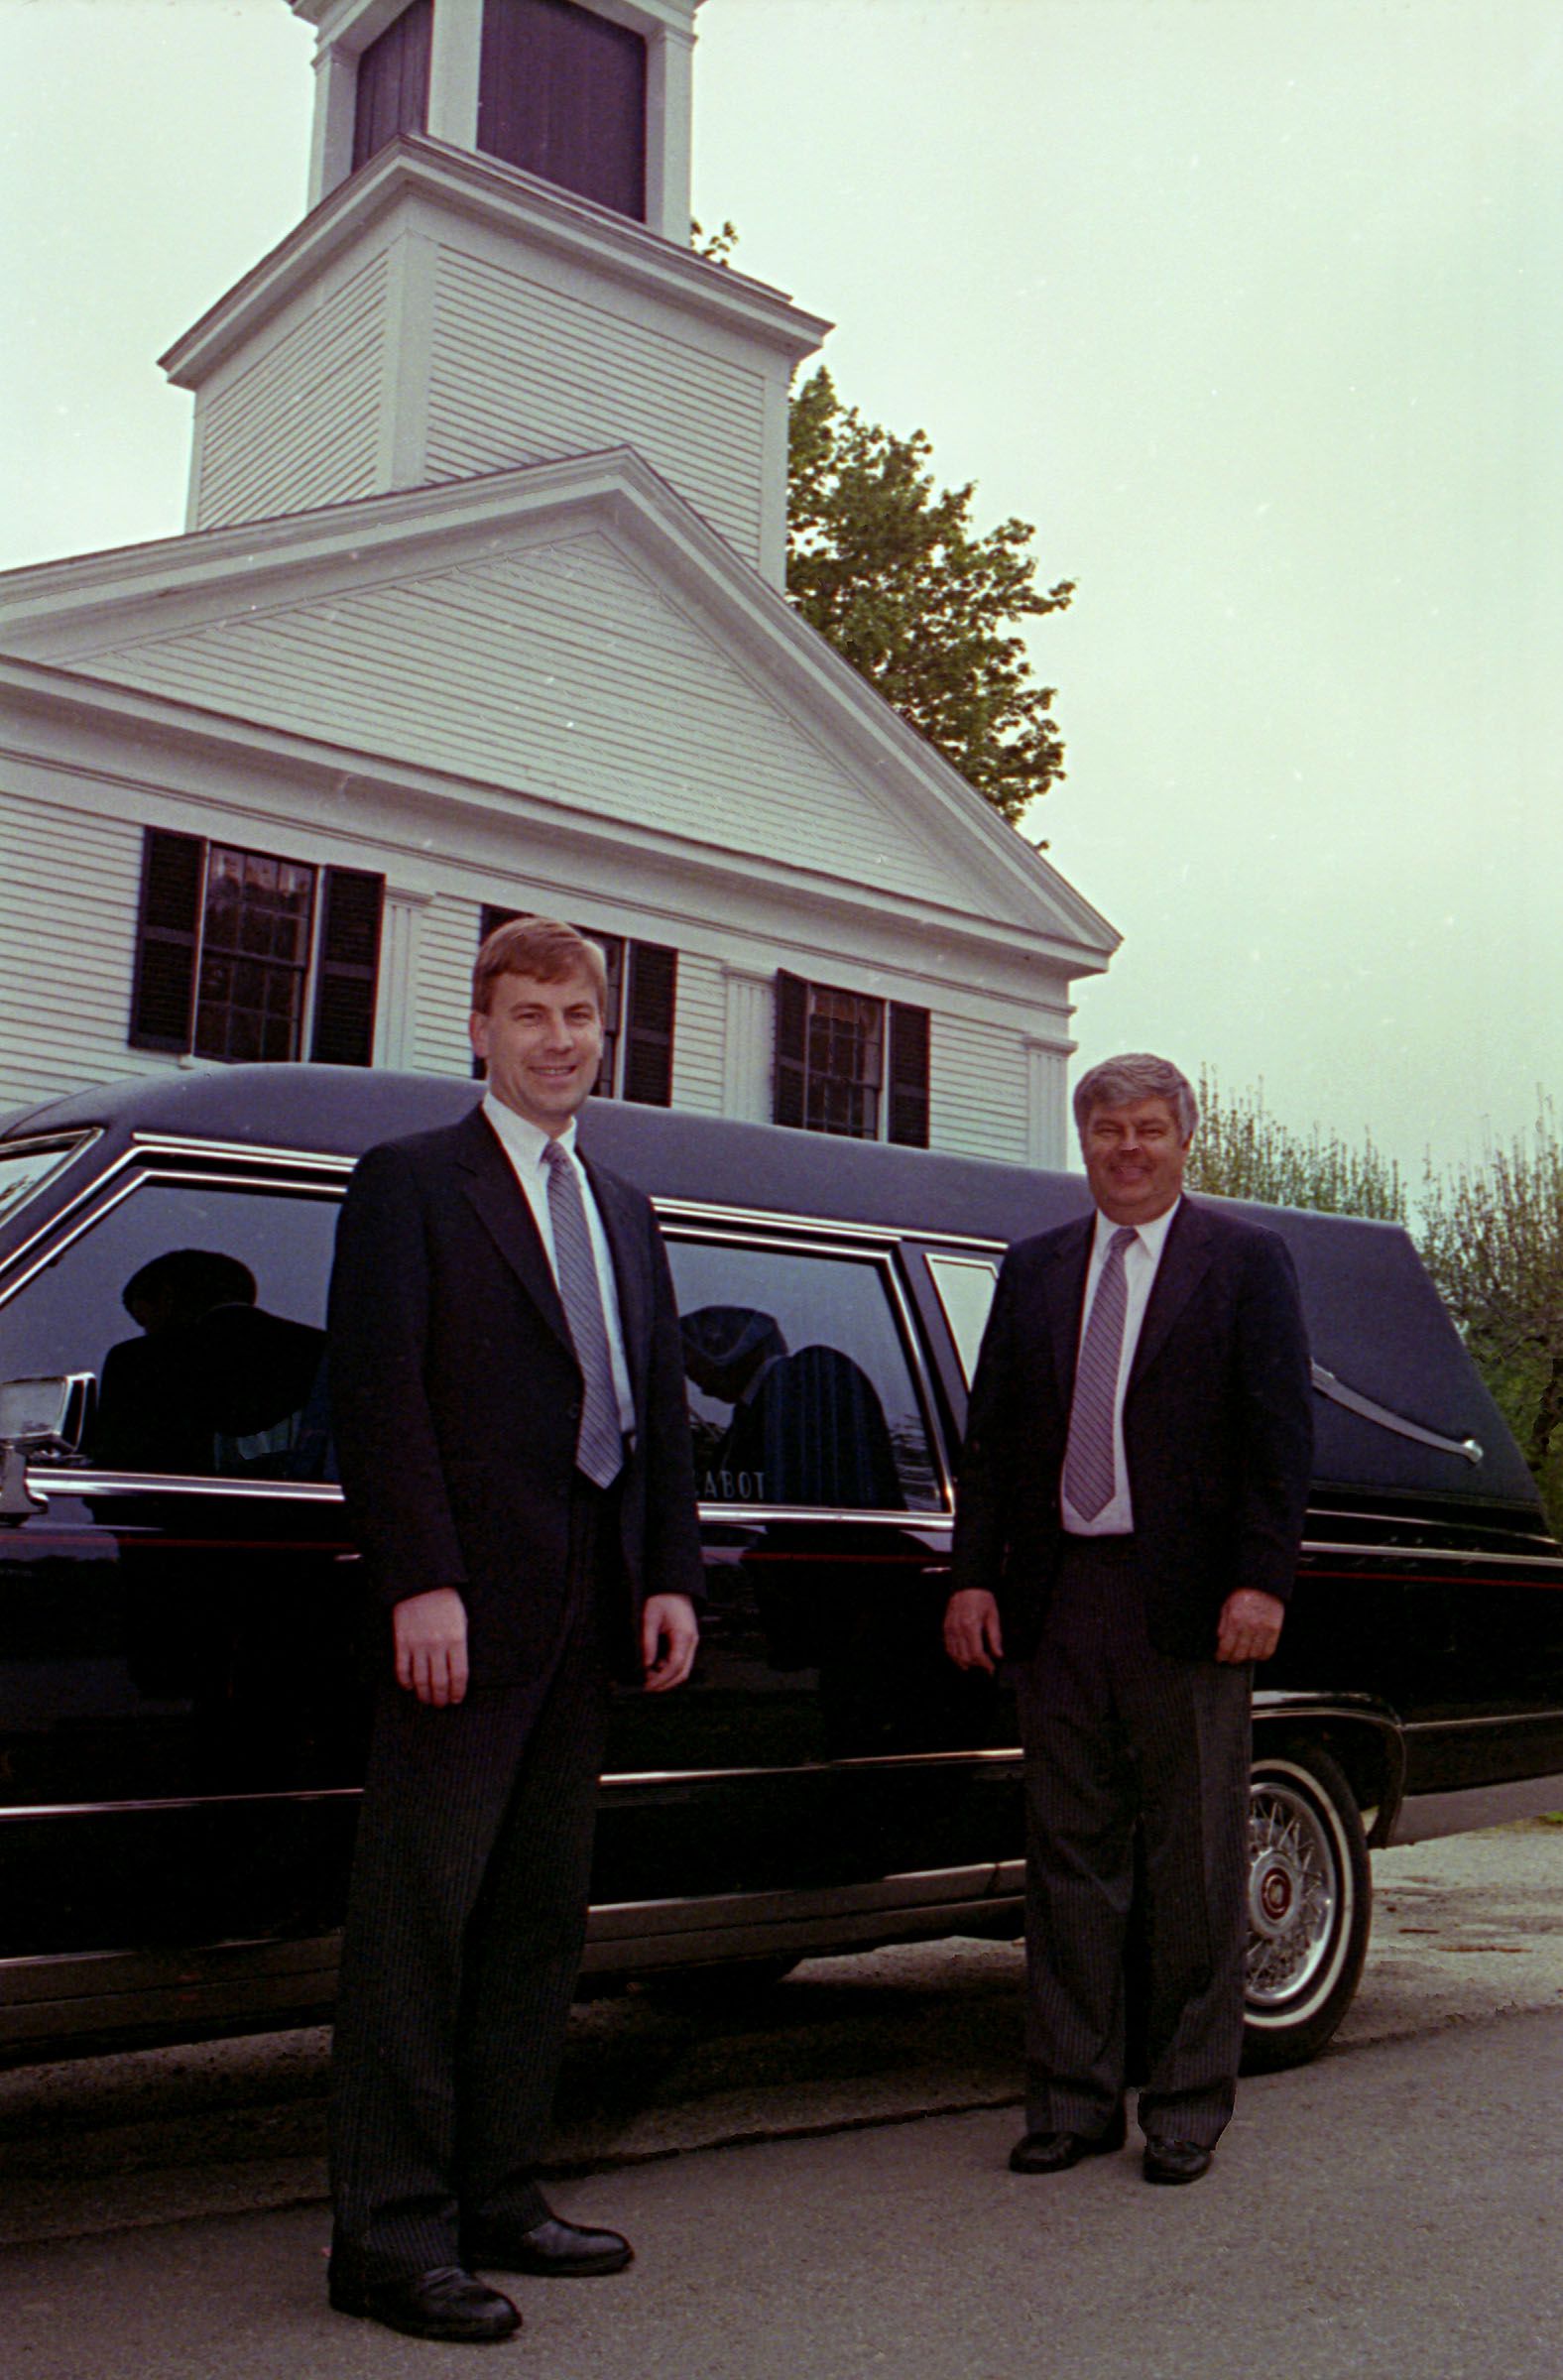 Greg and Dwight Camp of Cabot Funeral Home before a service begins in Plymouth Notch, Vt., on May 20, 1993. The business was started by the late Willard Cabot, Greg's great-grandfather, in 1917. The Camps conduct about 80 funerals a year. (Valley News - Medora Hebert) Copyright Valley News. May not be reprinted or used online without permission. Send requests to permission@vnews.com.